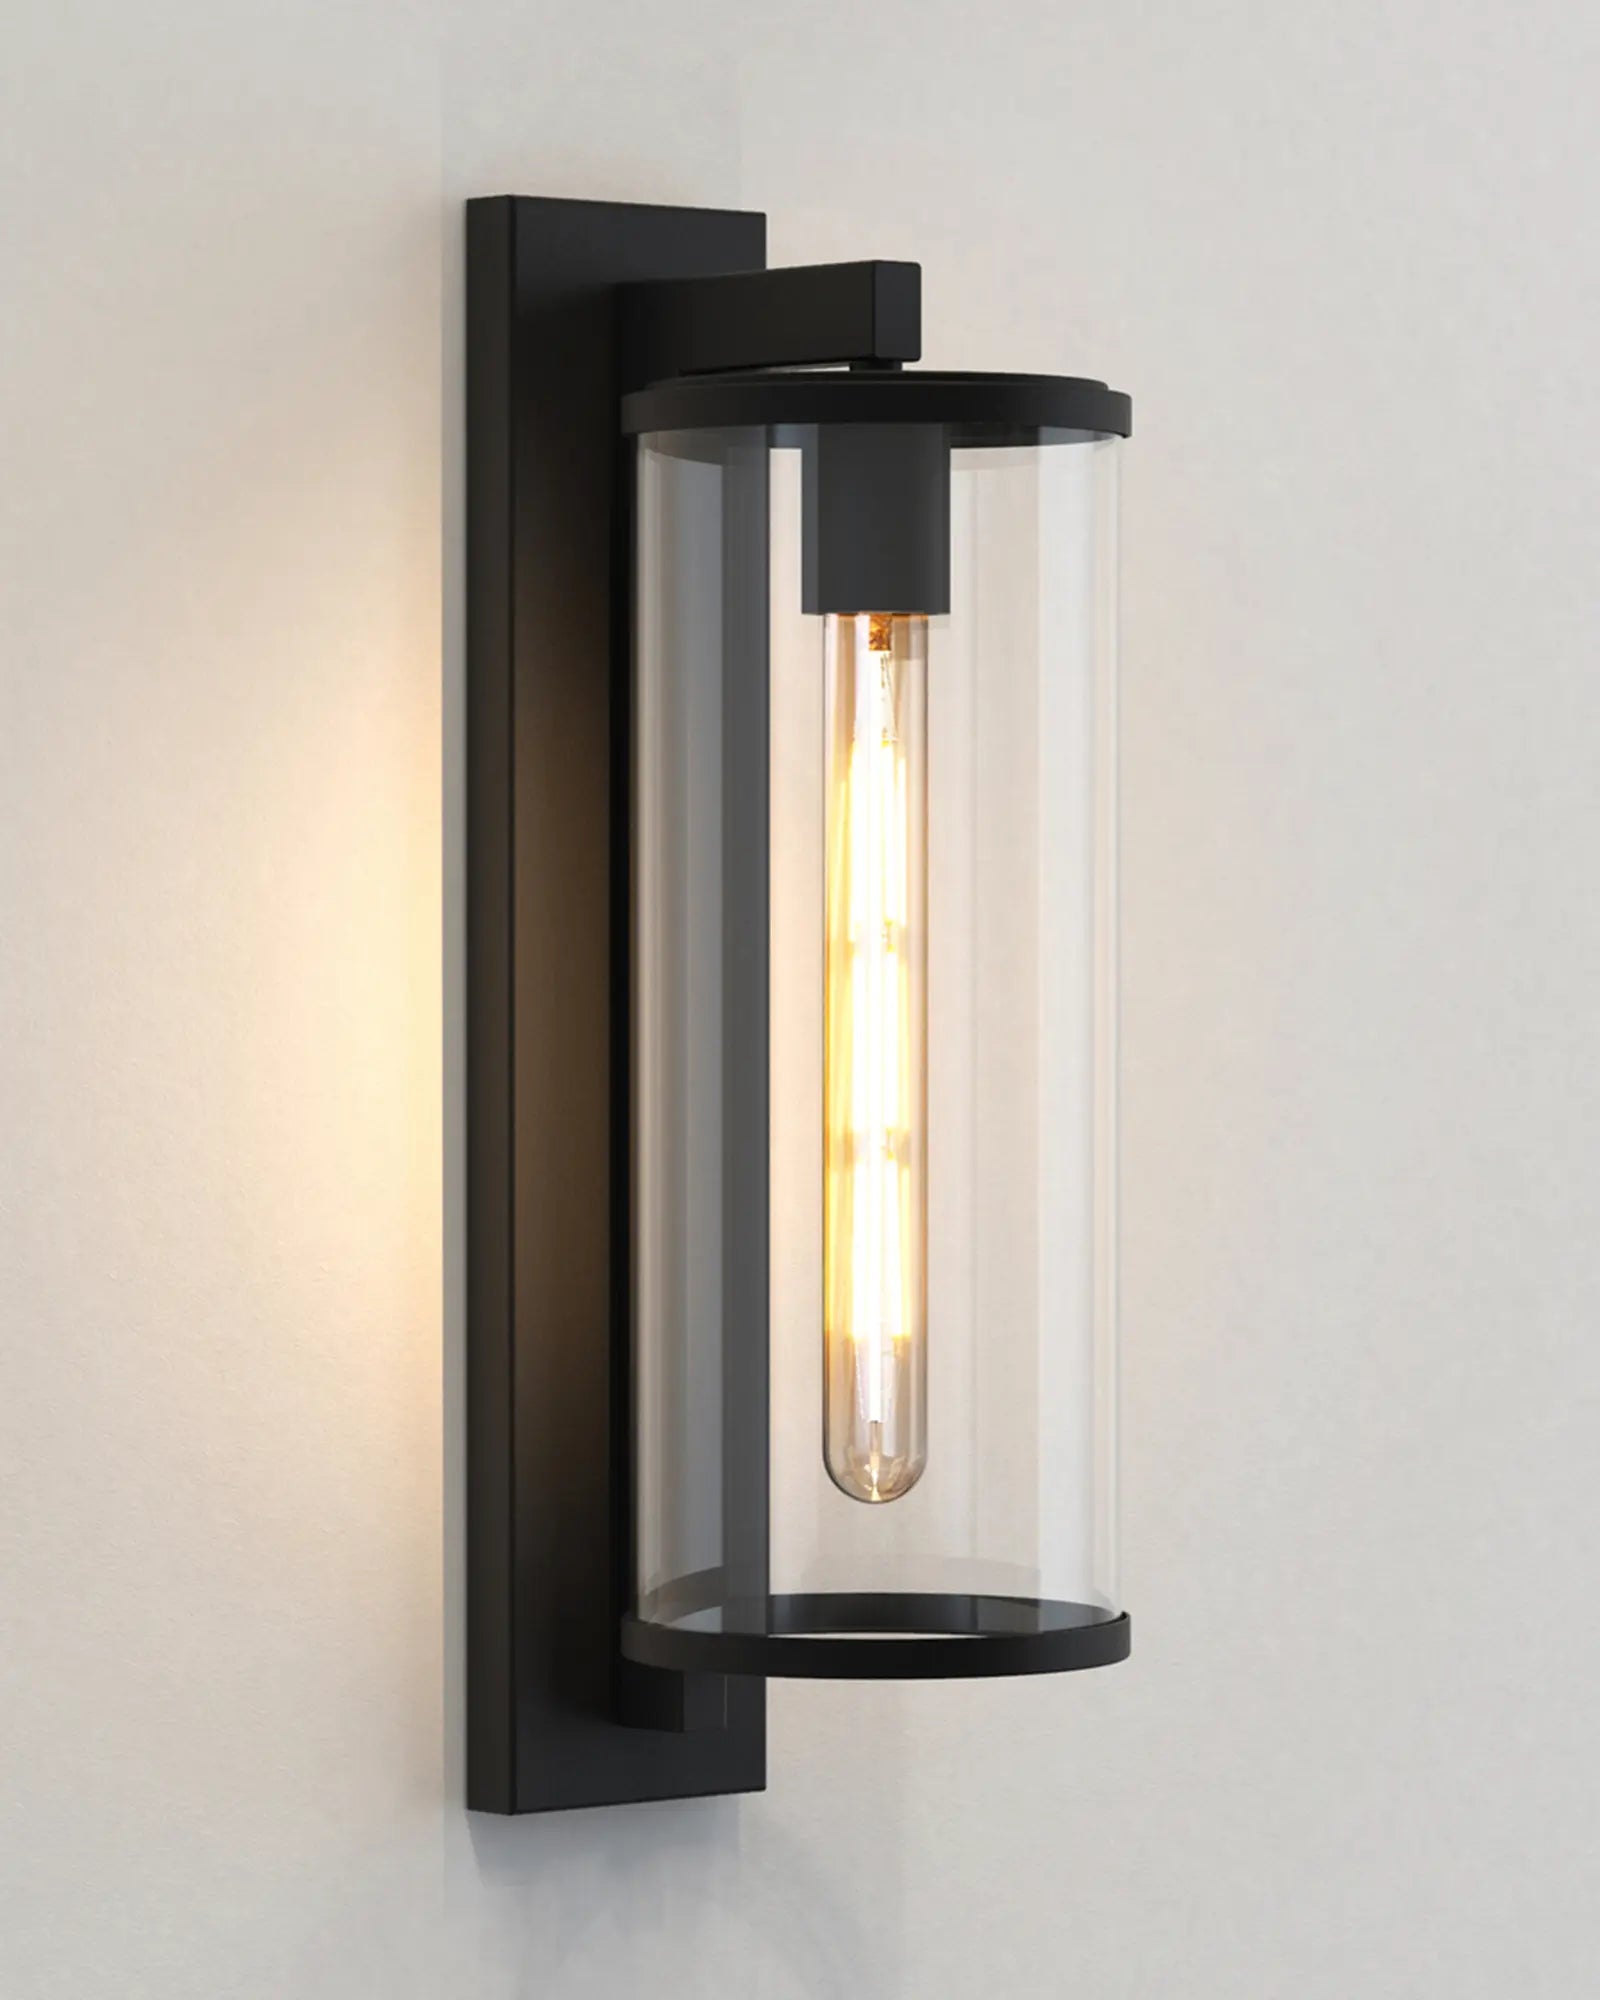 Pimlico Outdoor lantern style metal and glass wall light black 500